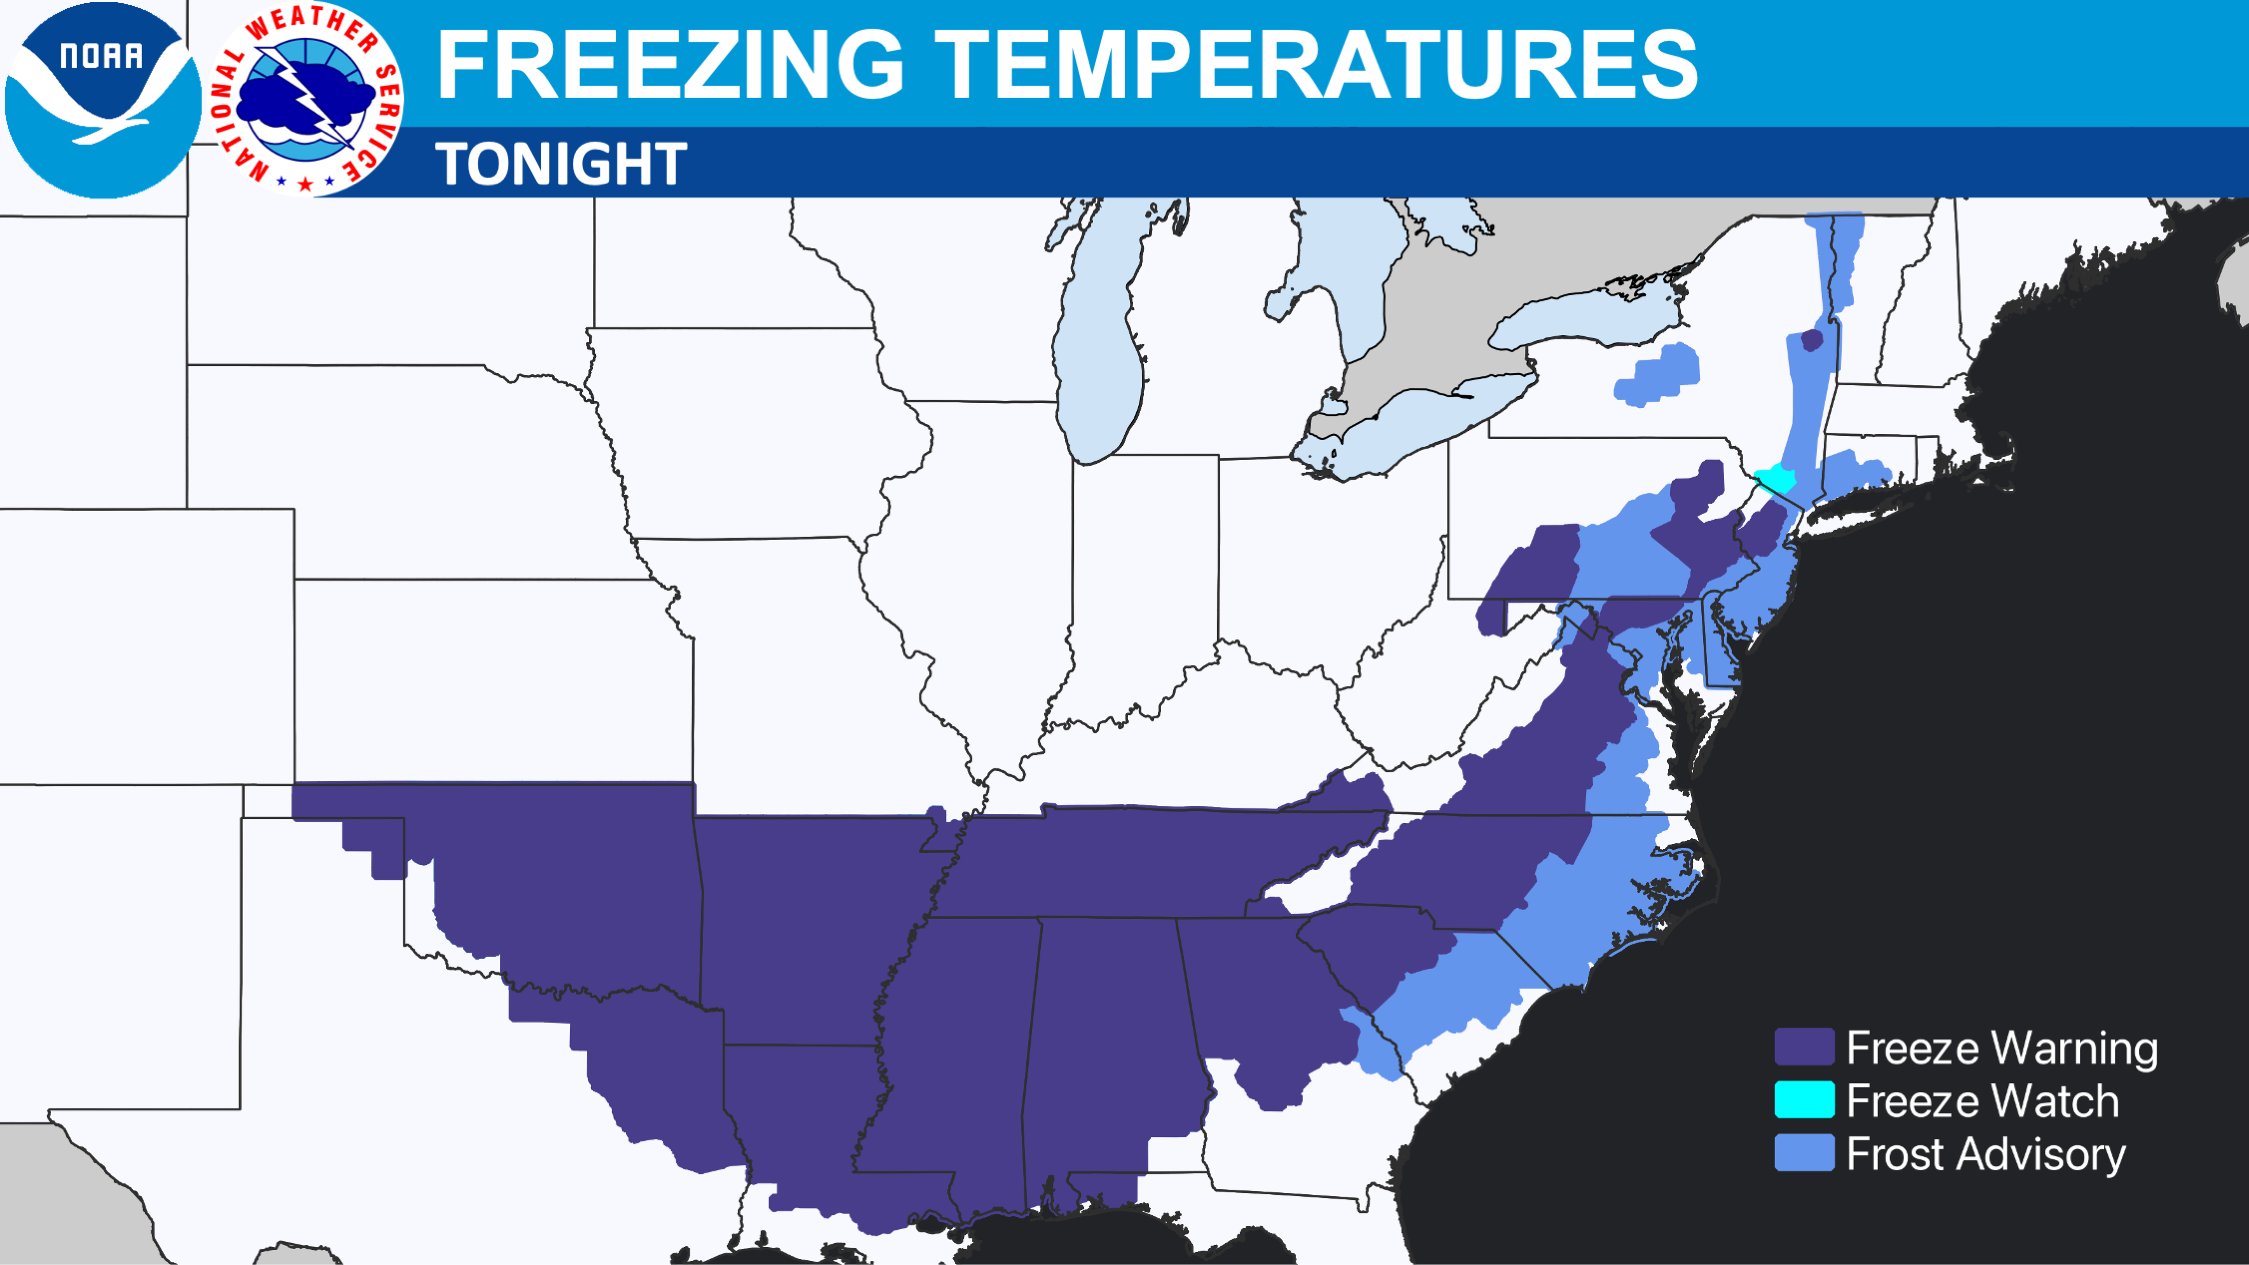 Map showing widespread freeze and frost warnings/advisories in the US south and east.